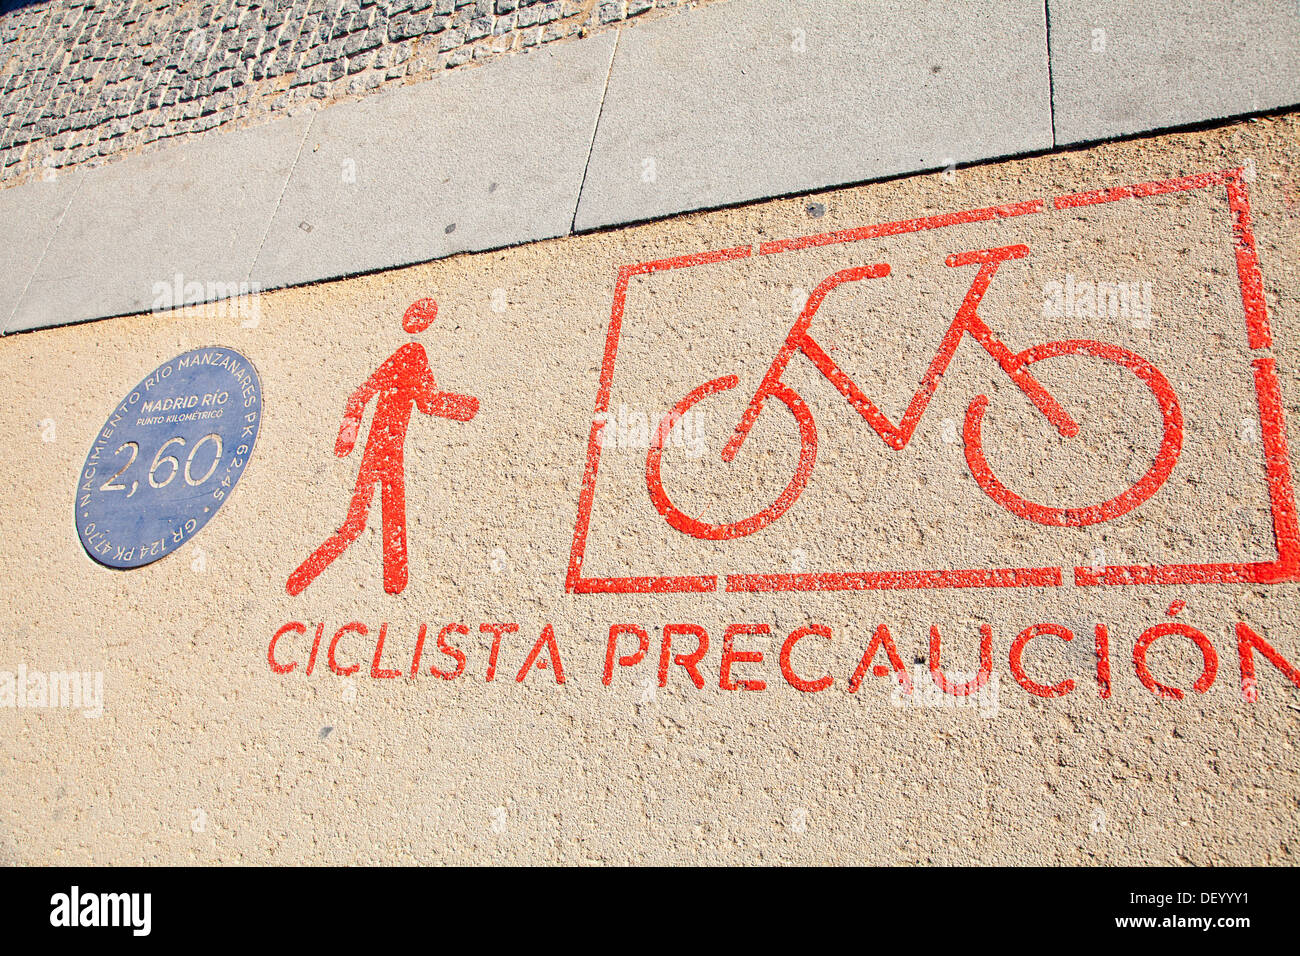 Information for cyclists in the park of Madrid Rio, an ecological development, in Madrid, Spain, Europe Stock Photo